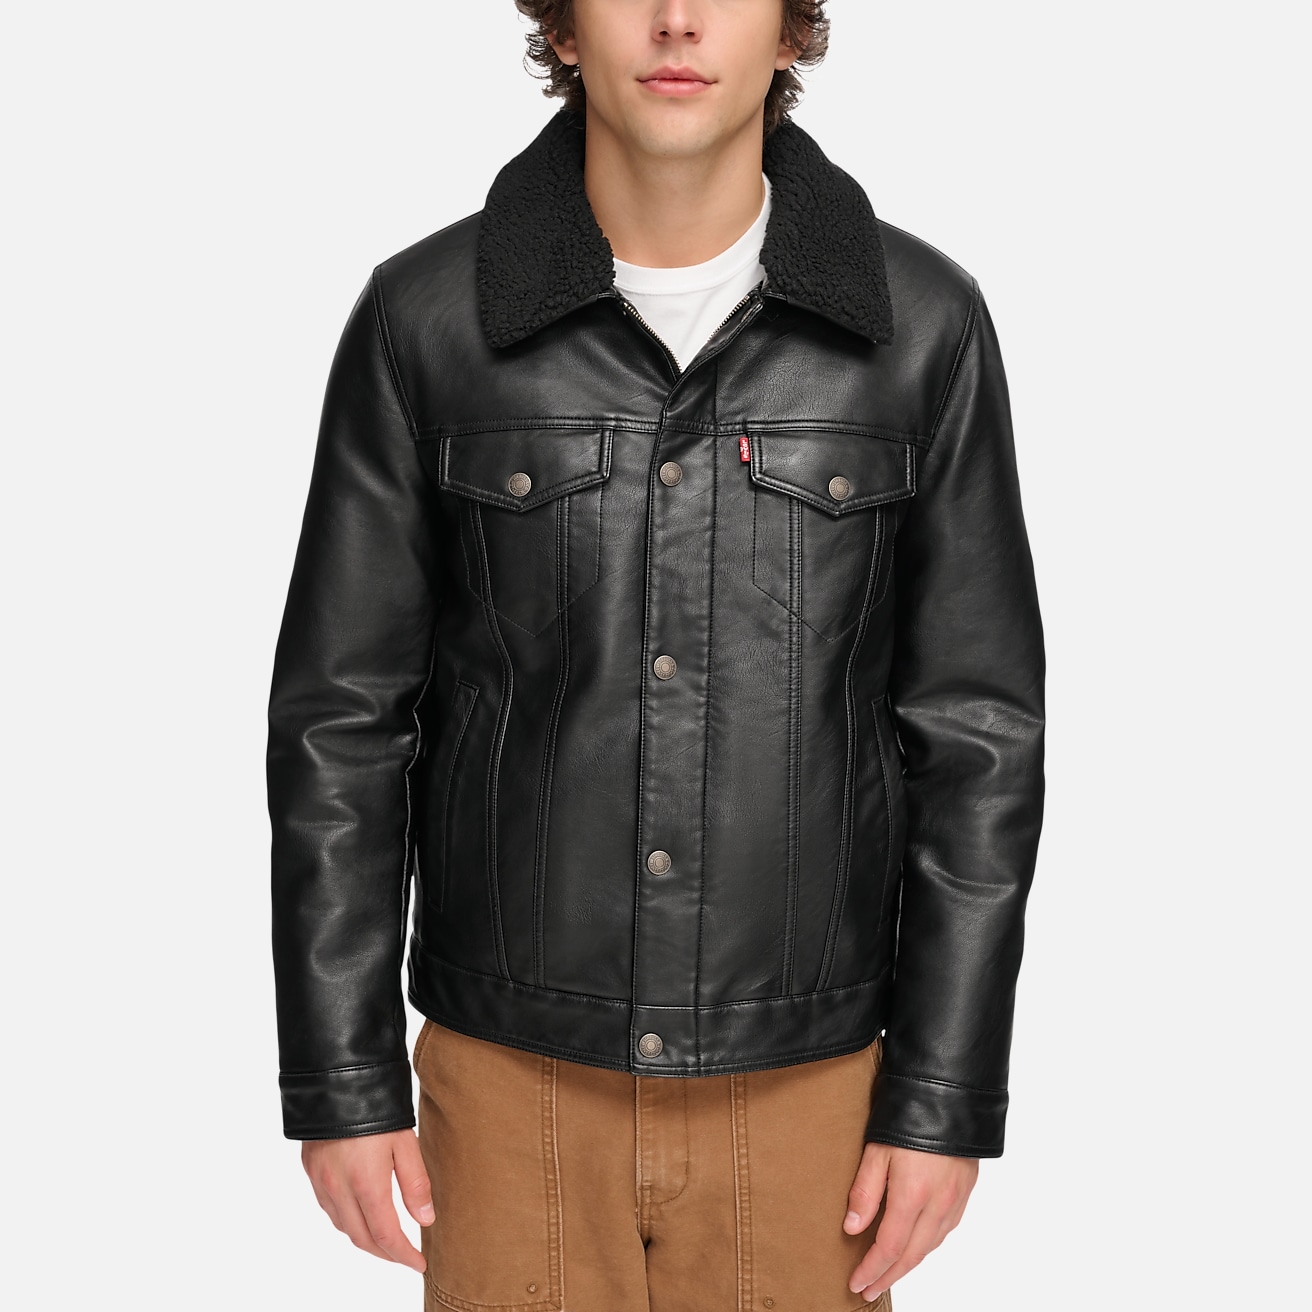 Levi's Modern Fit Faux Leather Trucker Jacket with Removable